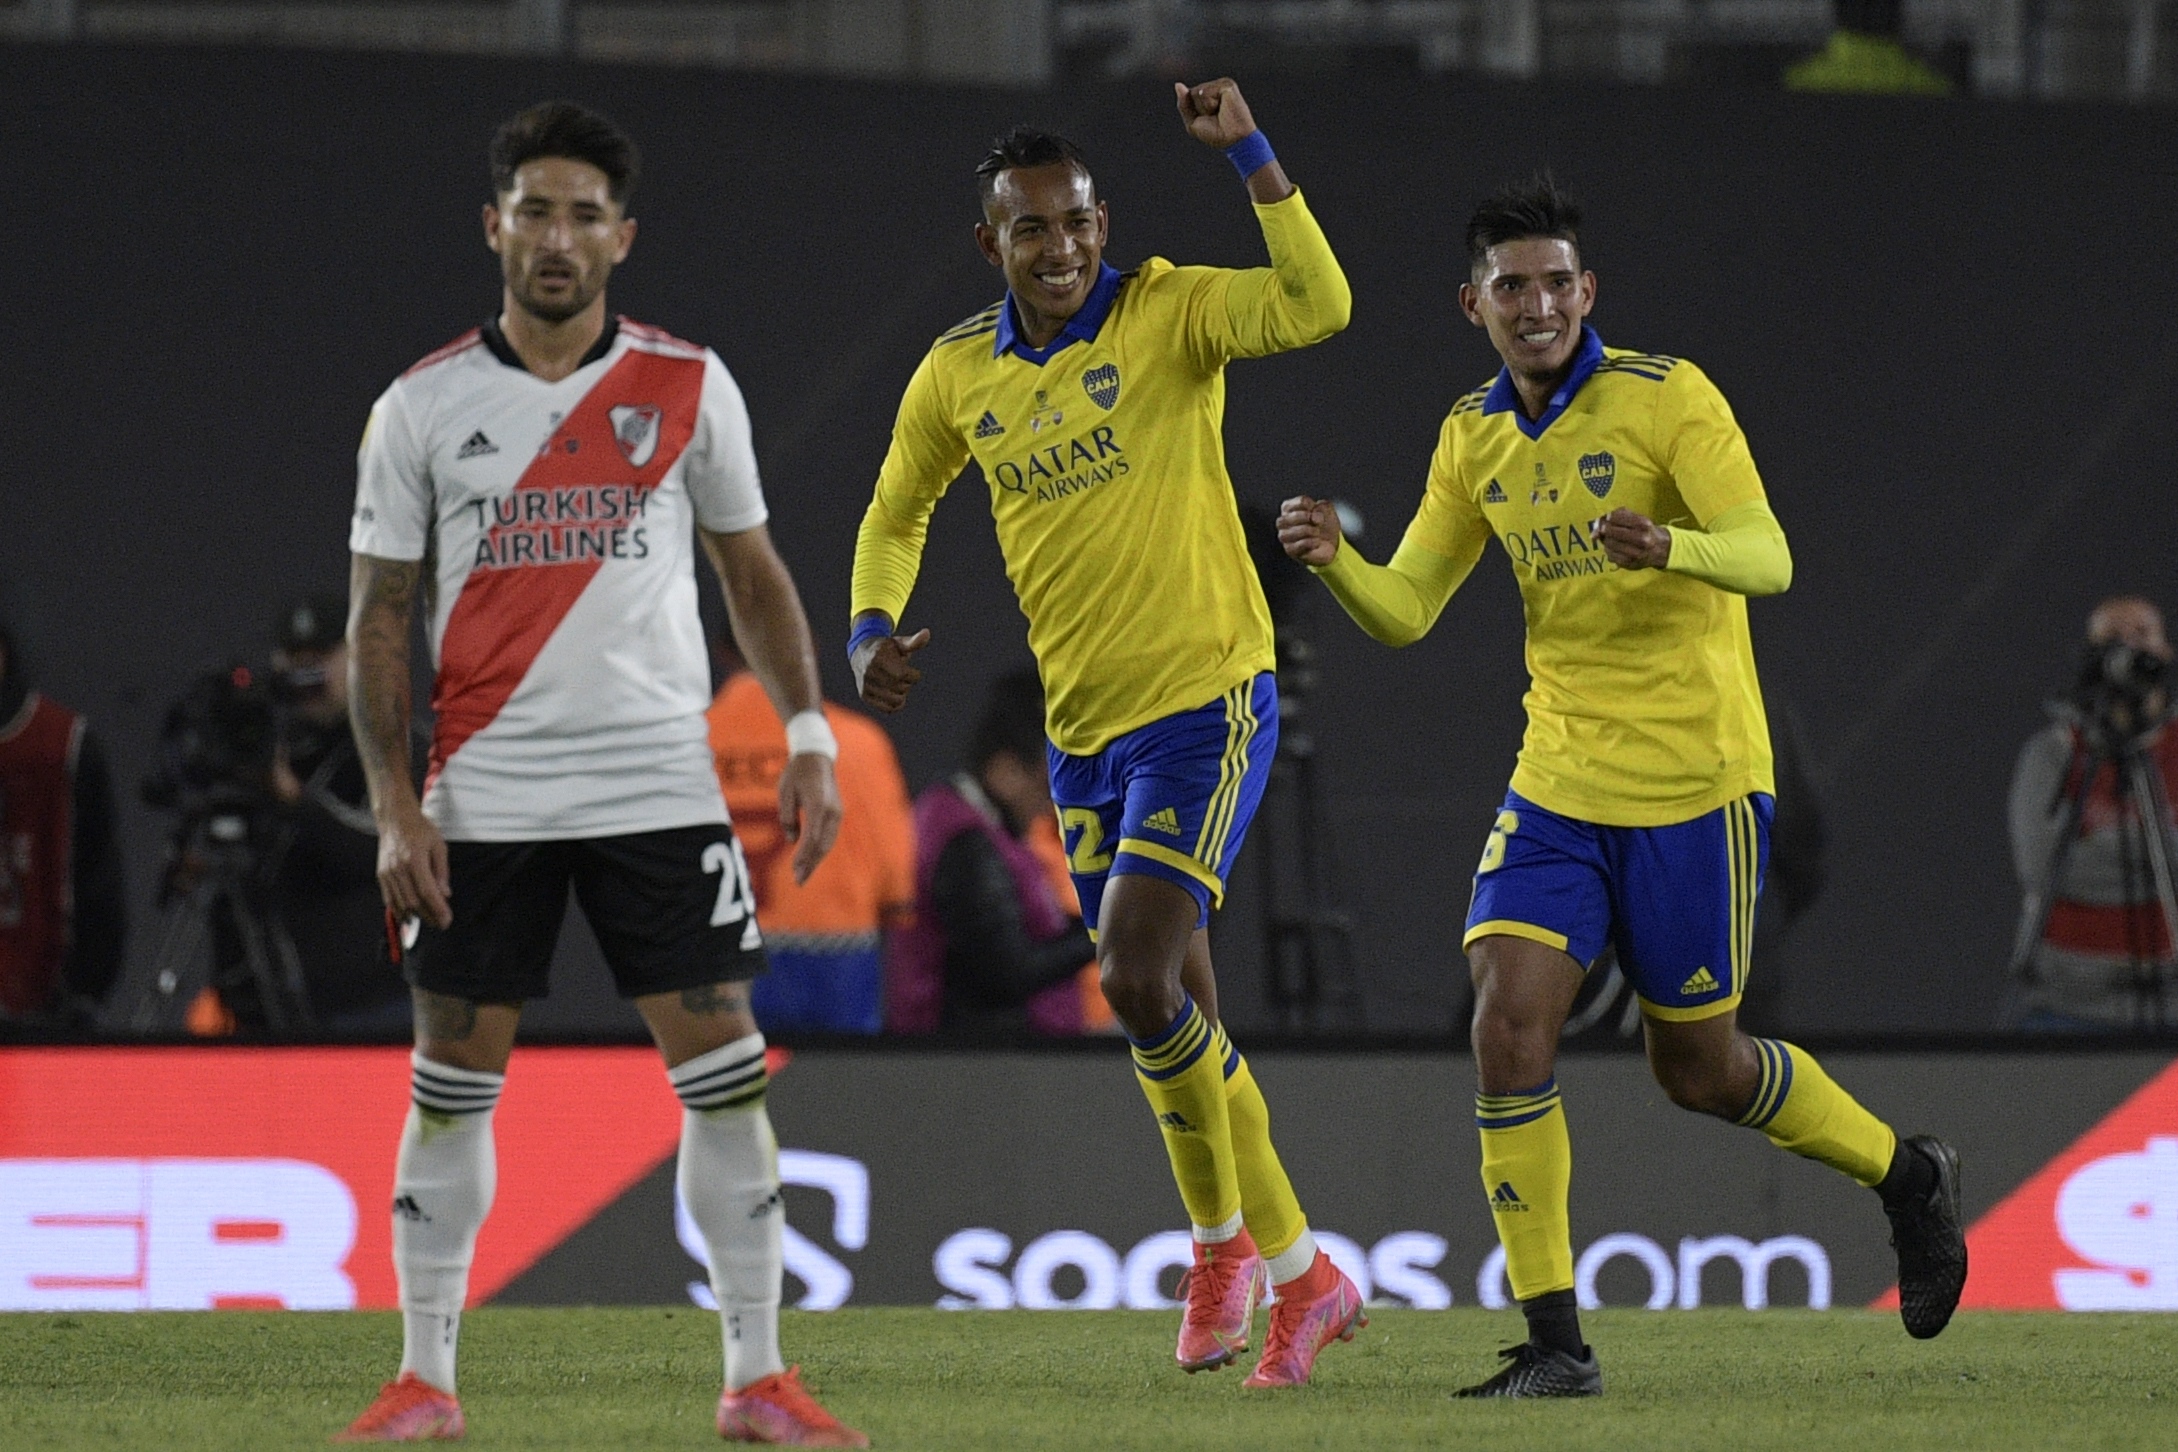 River v. Boca: Where and how to watch the Superclásico - Buenos Aires Herald